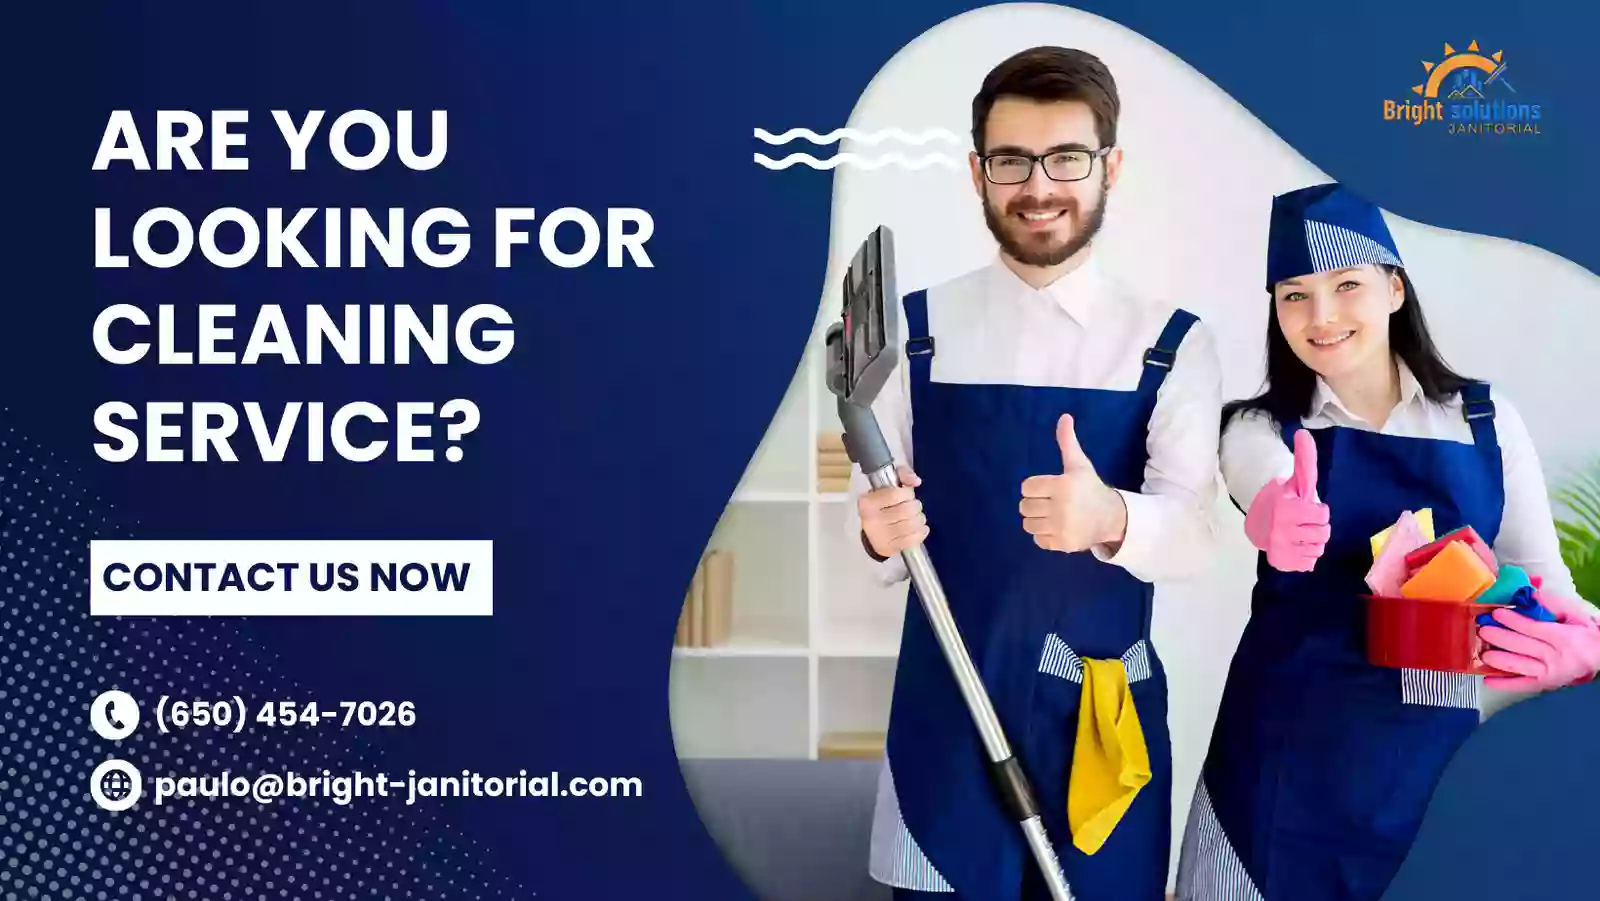 Bright solutions janitorial